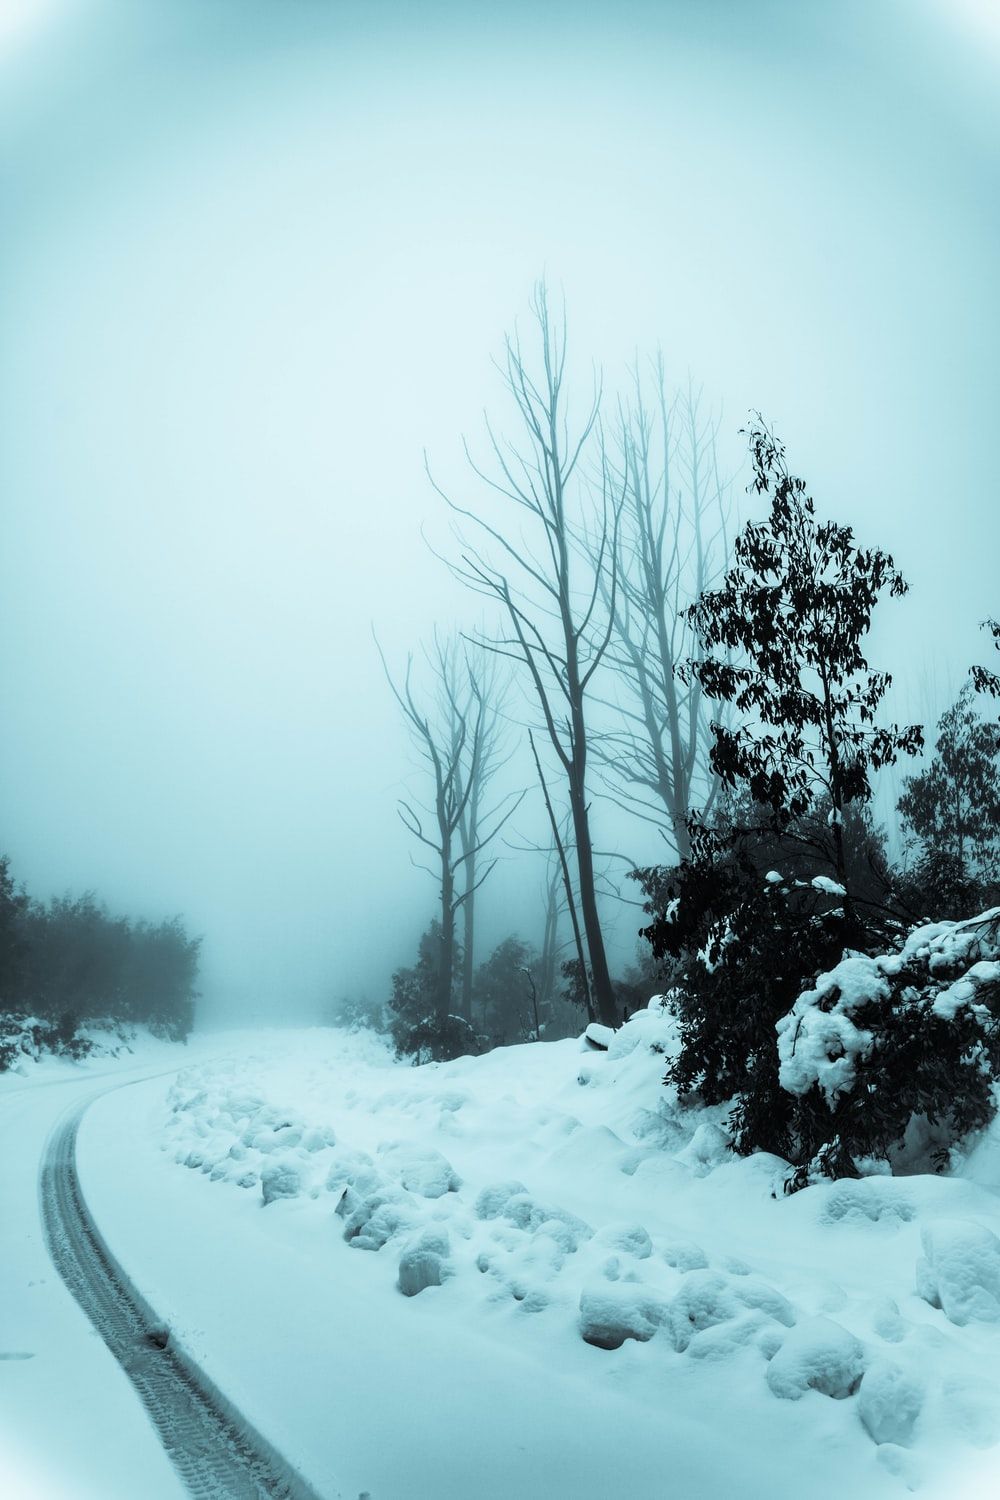 Snowy Road Picture. Download Free Image